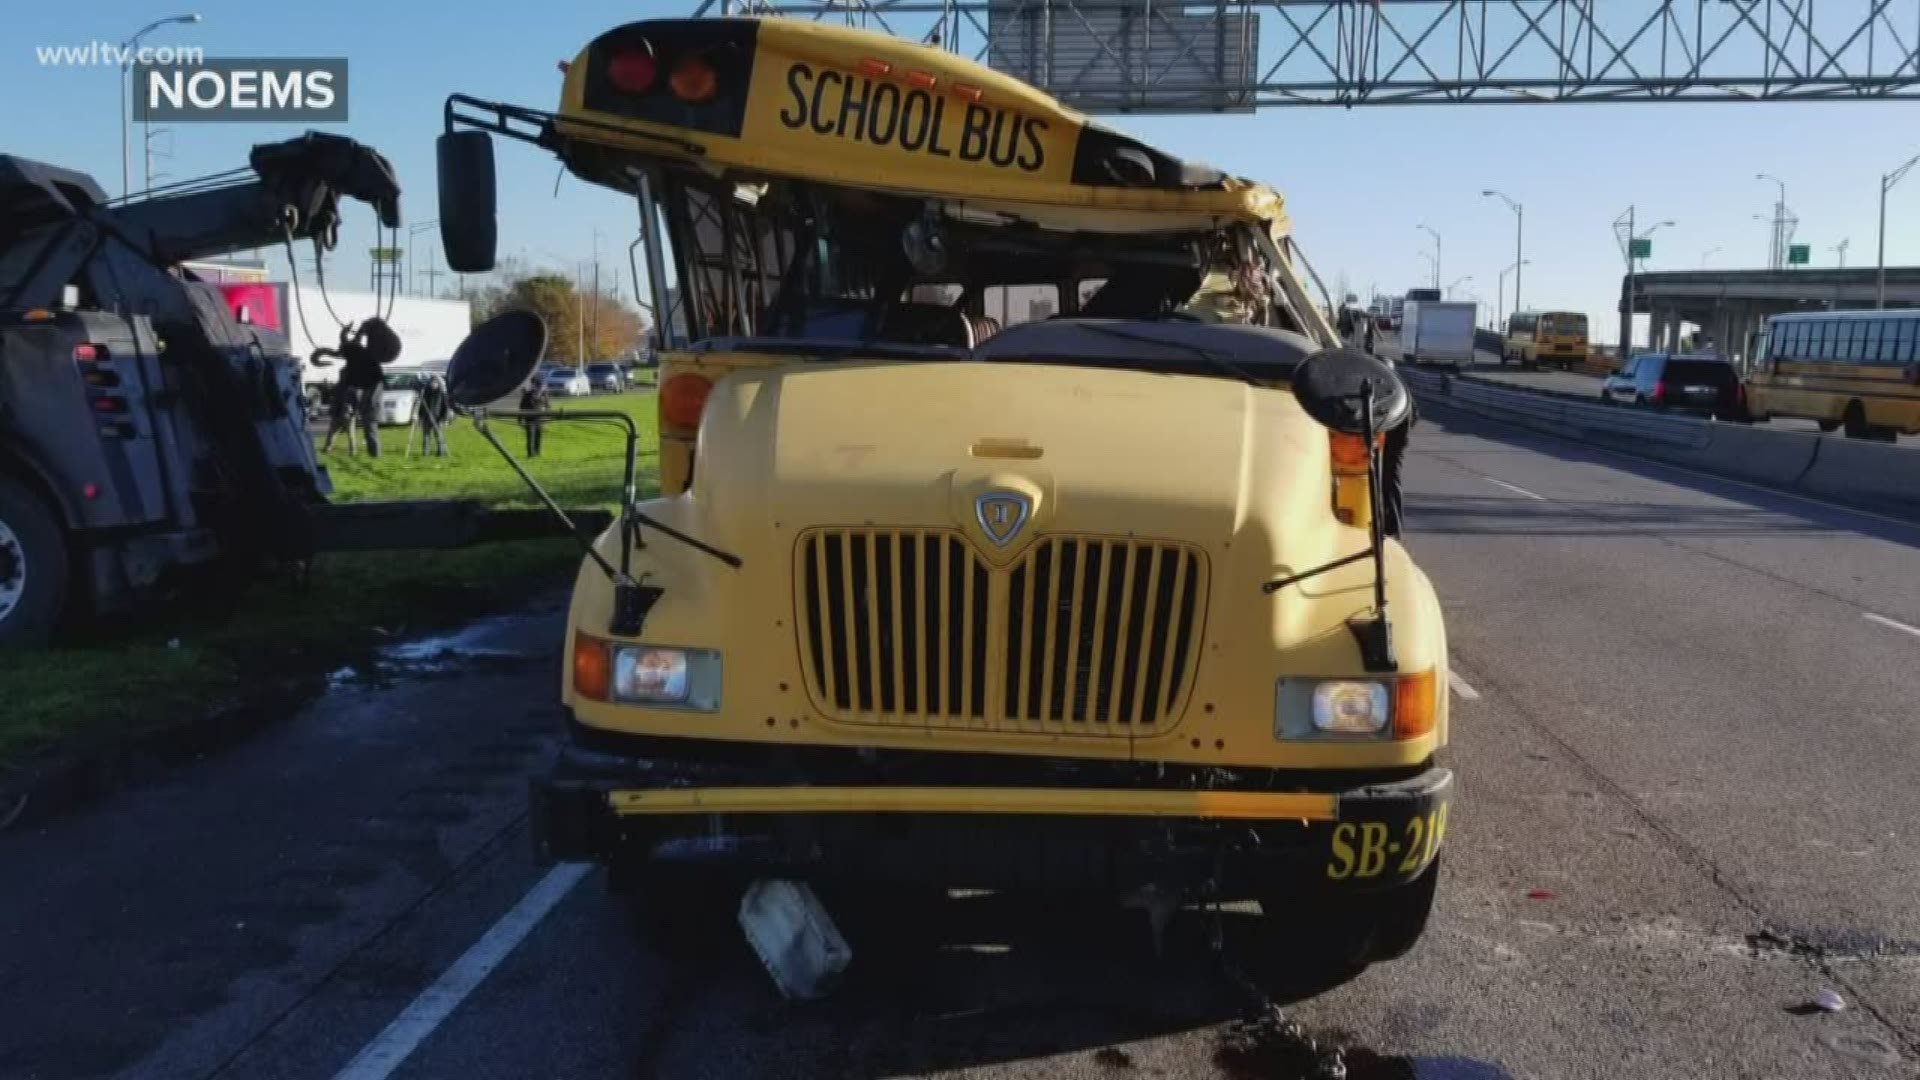 Monday, WWLTV investigators learned that roughly 300 of the 740 school buses across the New Orleans school system do not meet inspection requirements.